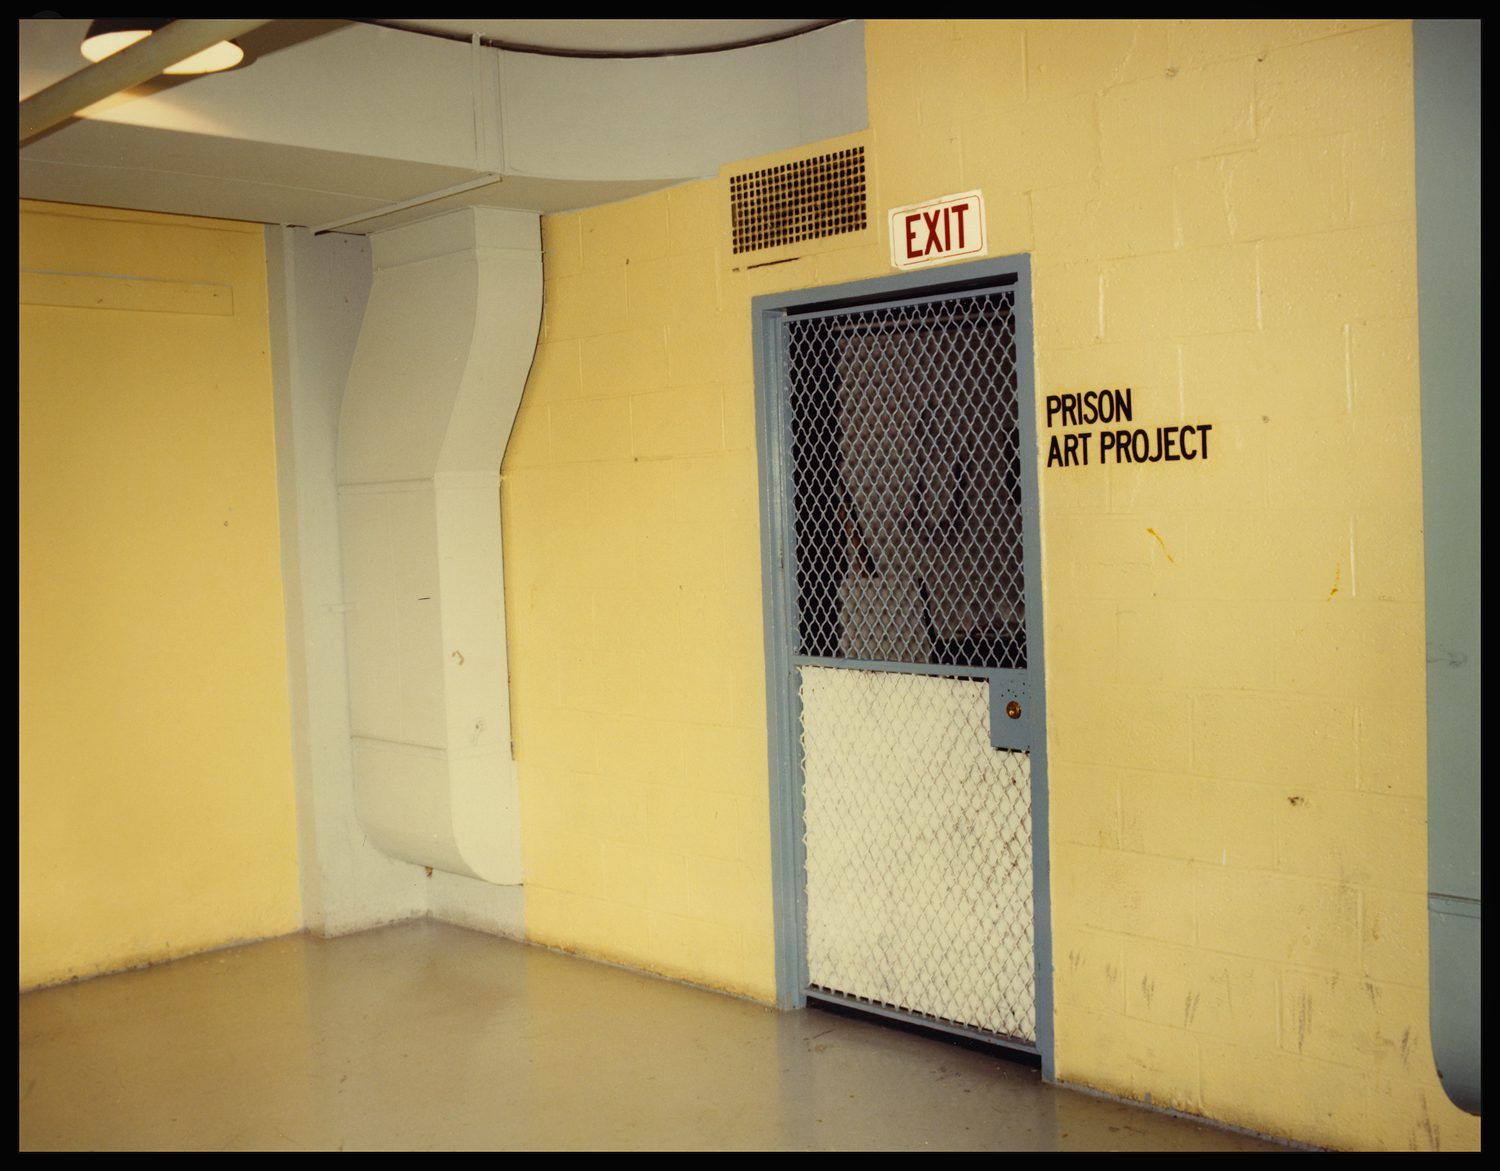 A caged door with an exit sign over it, the words "Prison Art Project" painted on the yellow wall.